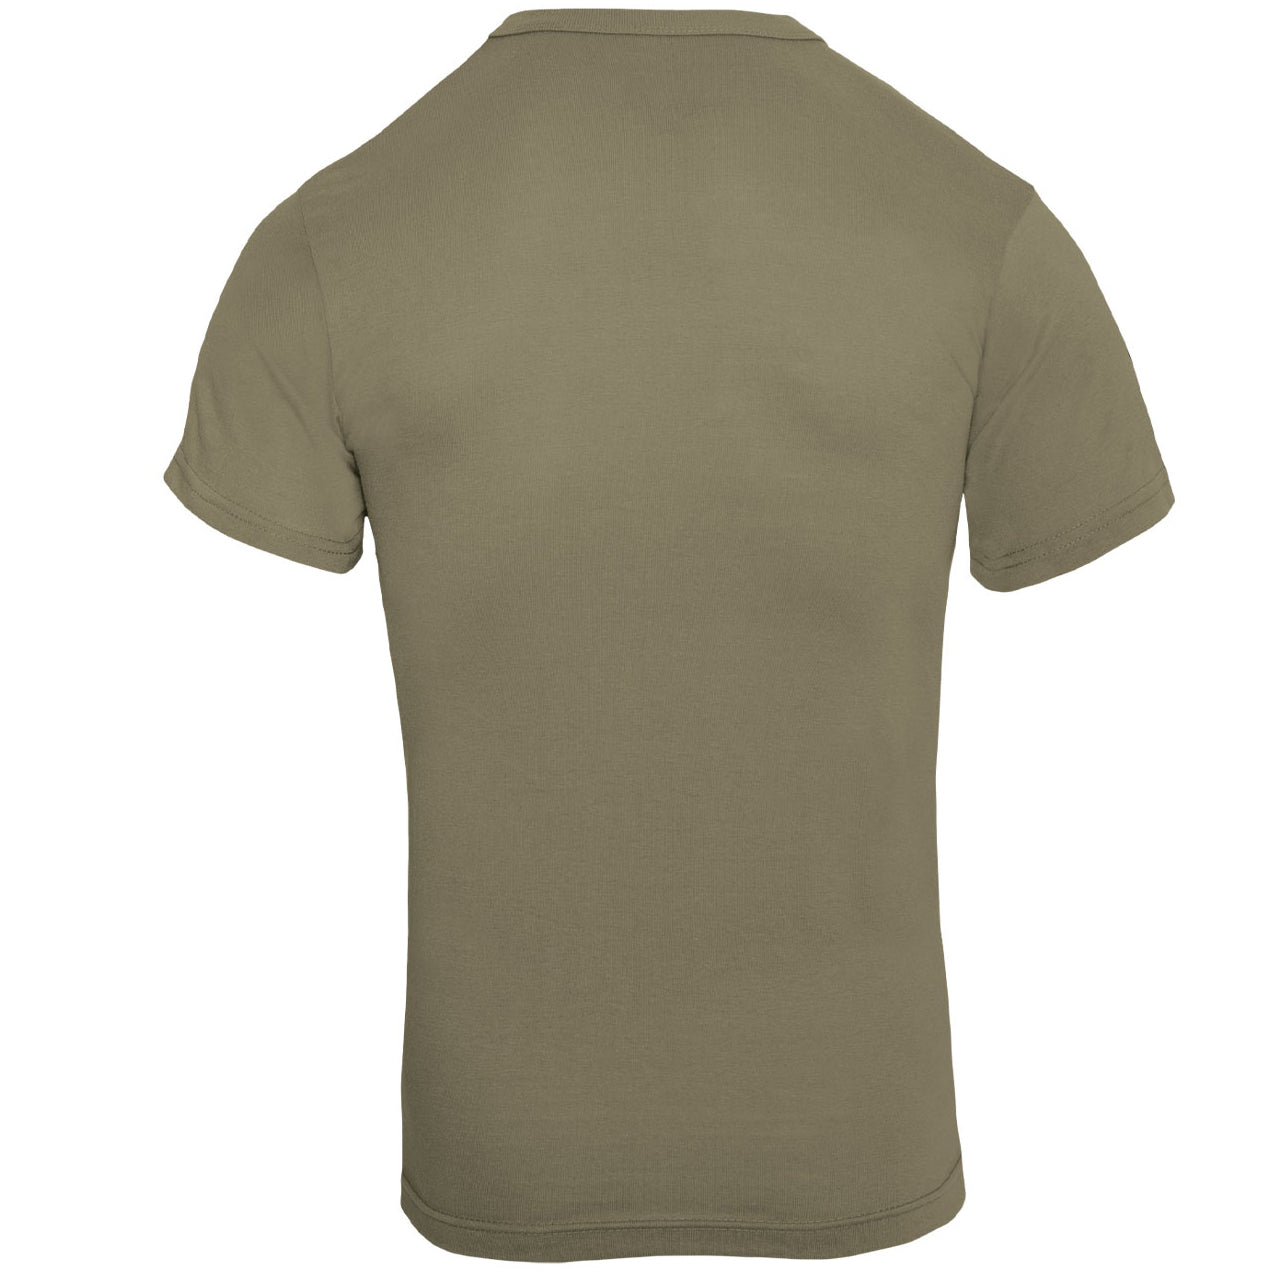 Train to the max with this Physical Training T-Shirt! Constructed Of A Comfortable And Breathable 60% Cotton / 40% Polyester Material Ideal For Military PT Training, Workouts Or As An Everyday Shirt Tagless Label For Added Comfort Available In A Variety Of Military Prints And Colors at www.defenceqstore.com.au